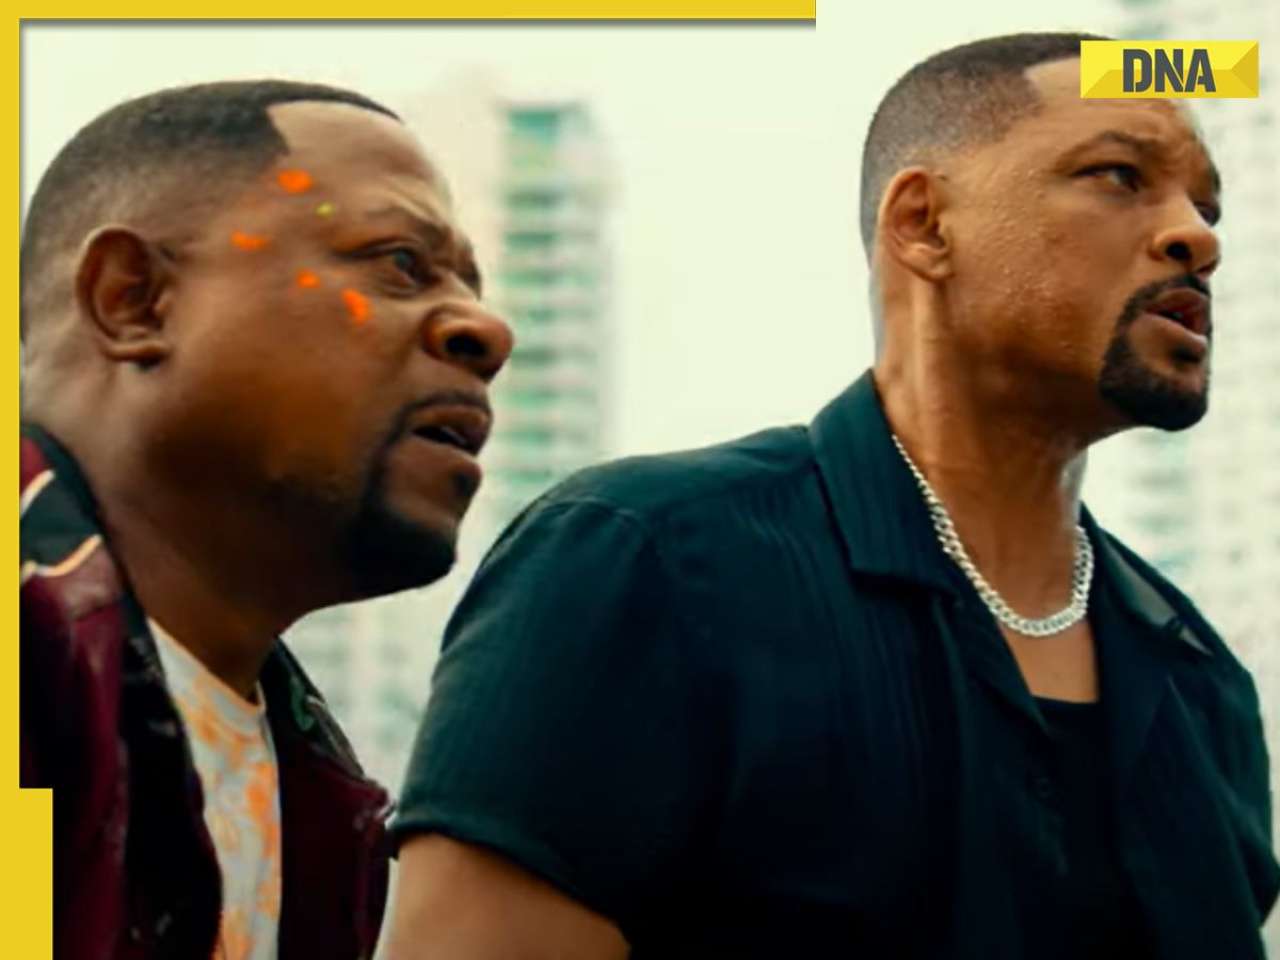 Bad Boys Ride or Die trailer: Miami's finest Will Smith, Martin Lawrence framed as fugitives; fans say 'action ka baap'